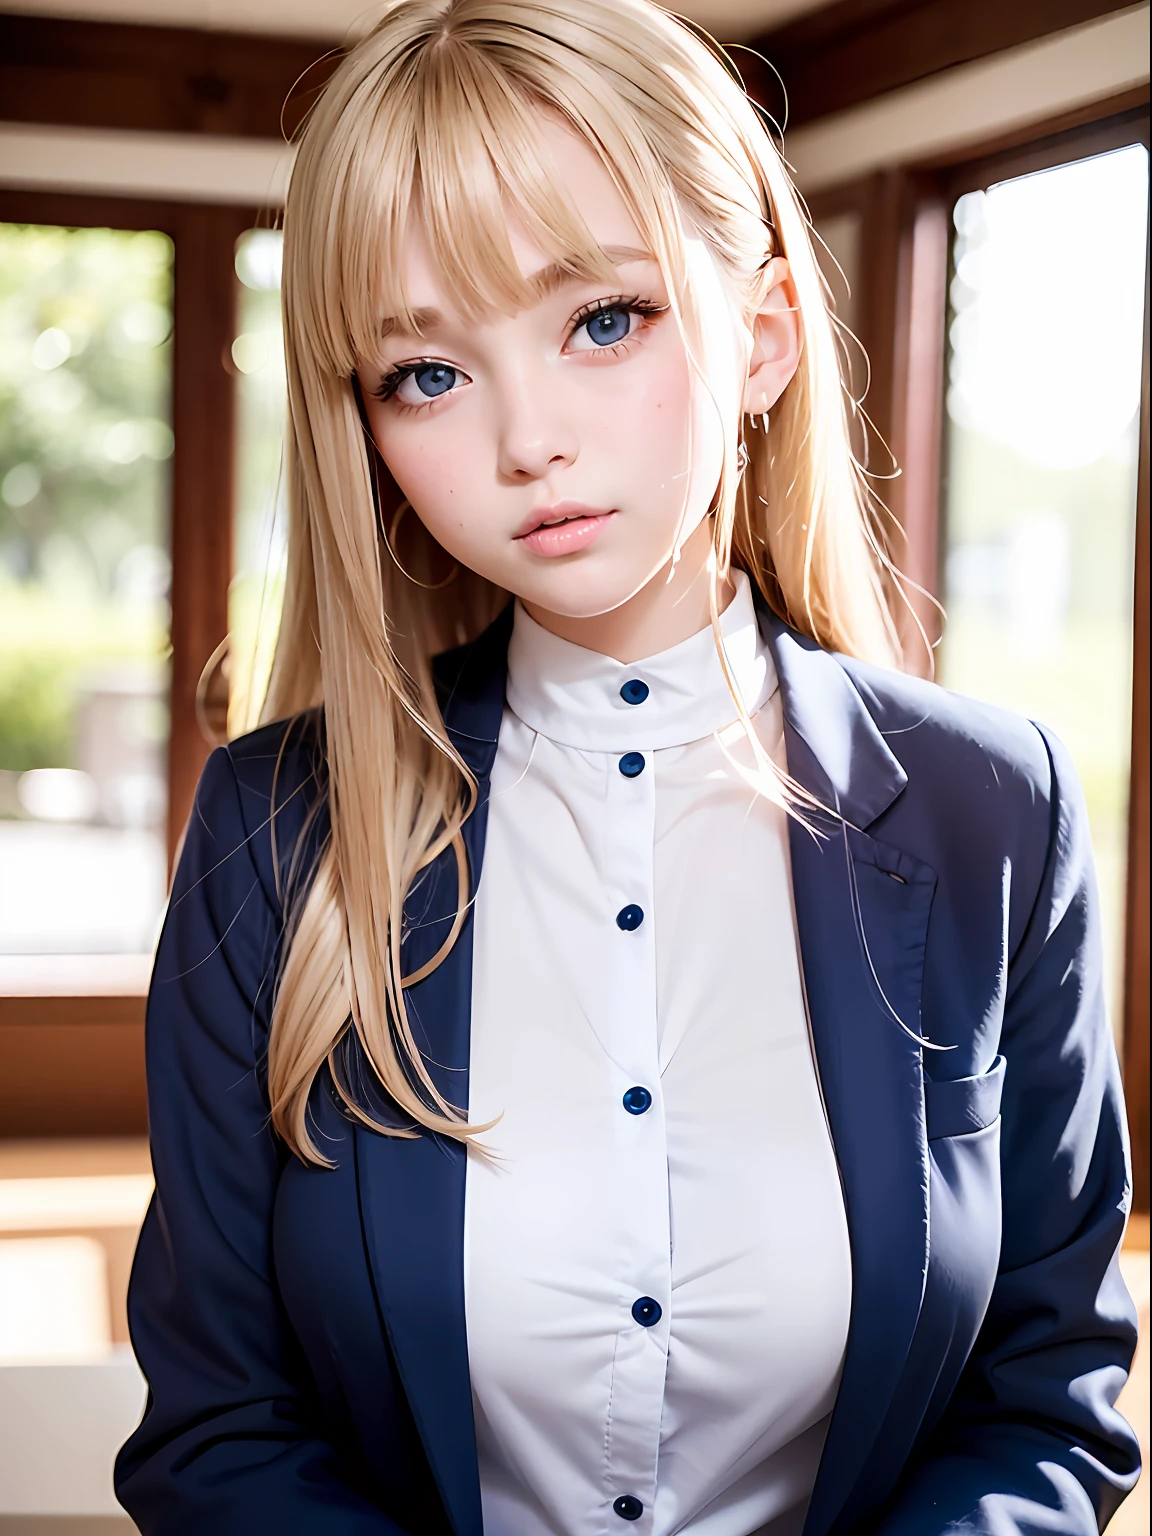 portlate、School Uniforms、bright expression、Young shiny shiny white shiny skin、ultimate beauty girl、Best Looks、The most beautiful bright blonde hair in the world、Super long silky straight hair、Beautiful bangs that shine、Glowing crystal clear attractive big blue eyes、Very beautiful lovely cute 17 year old girl、Lush bust。